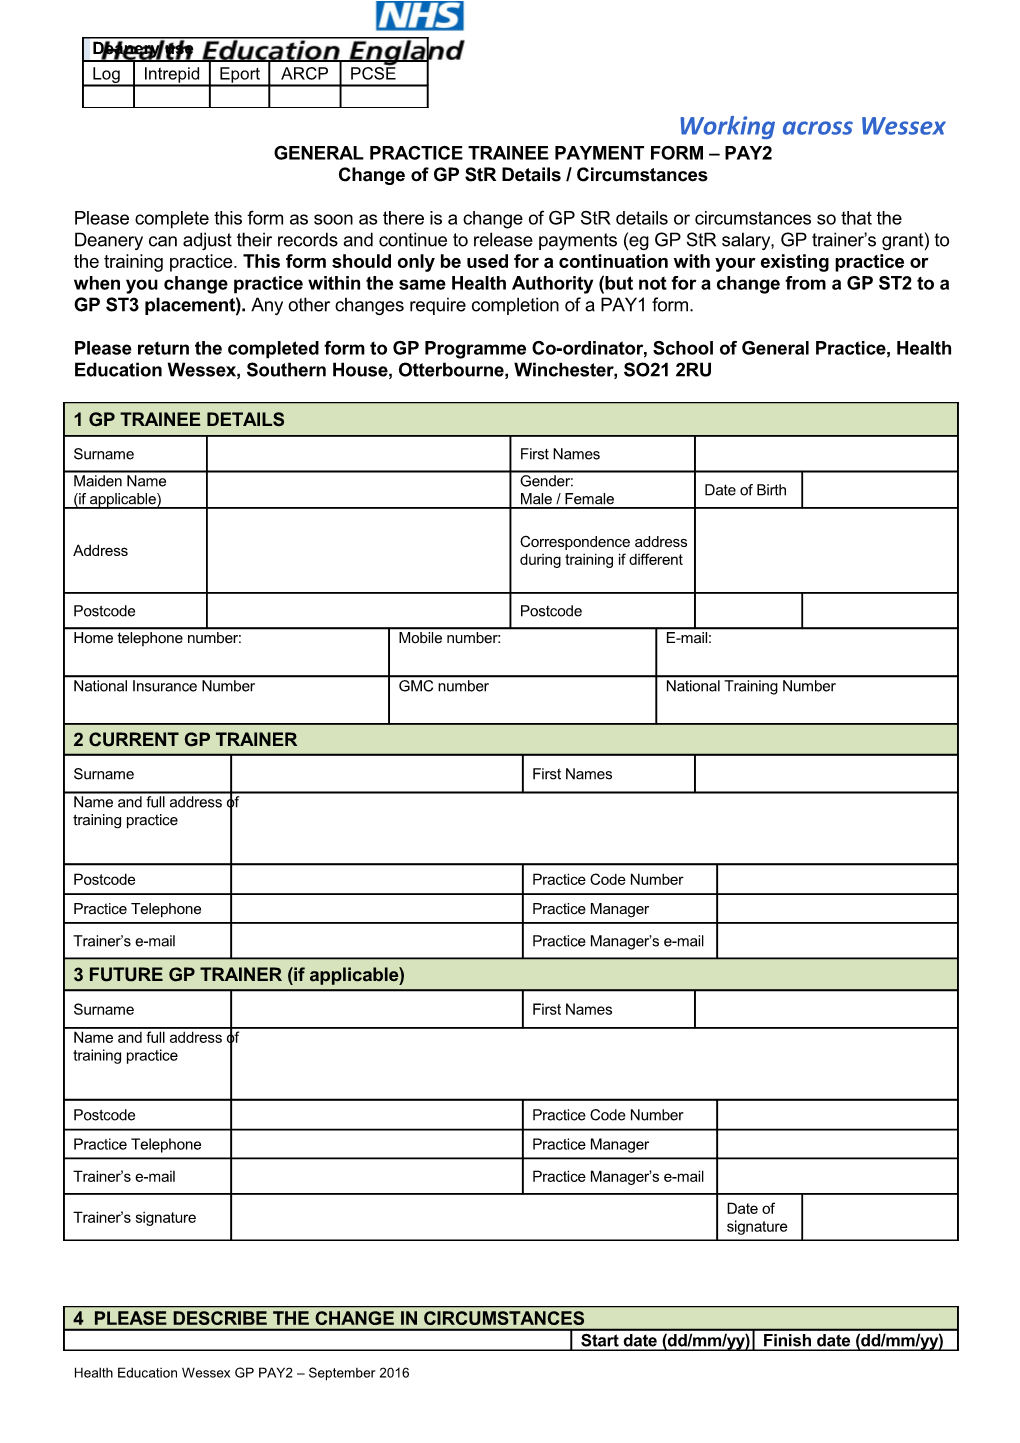 General Practice Trainee Payment Form Pay2